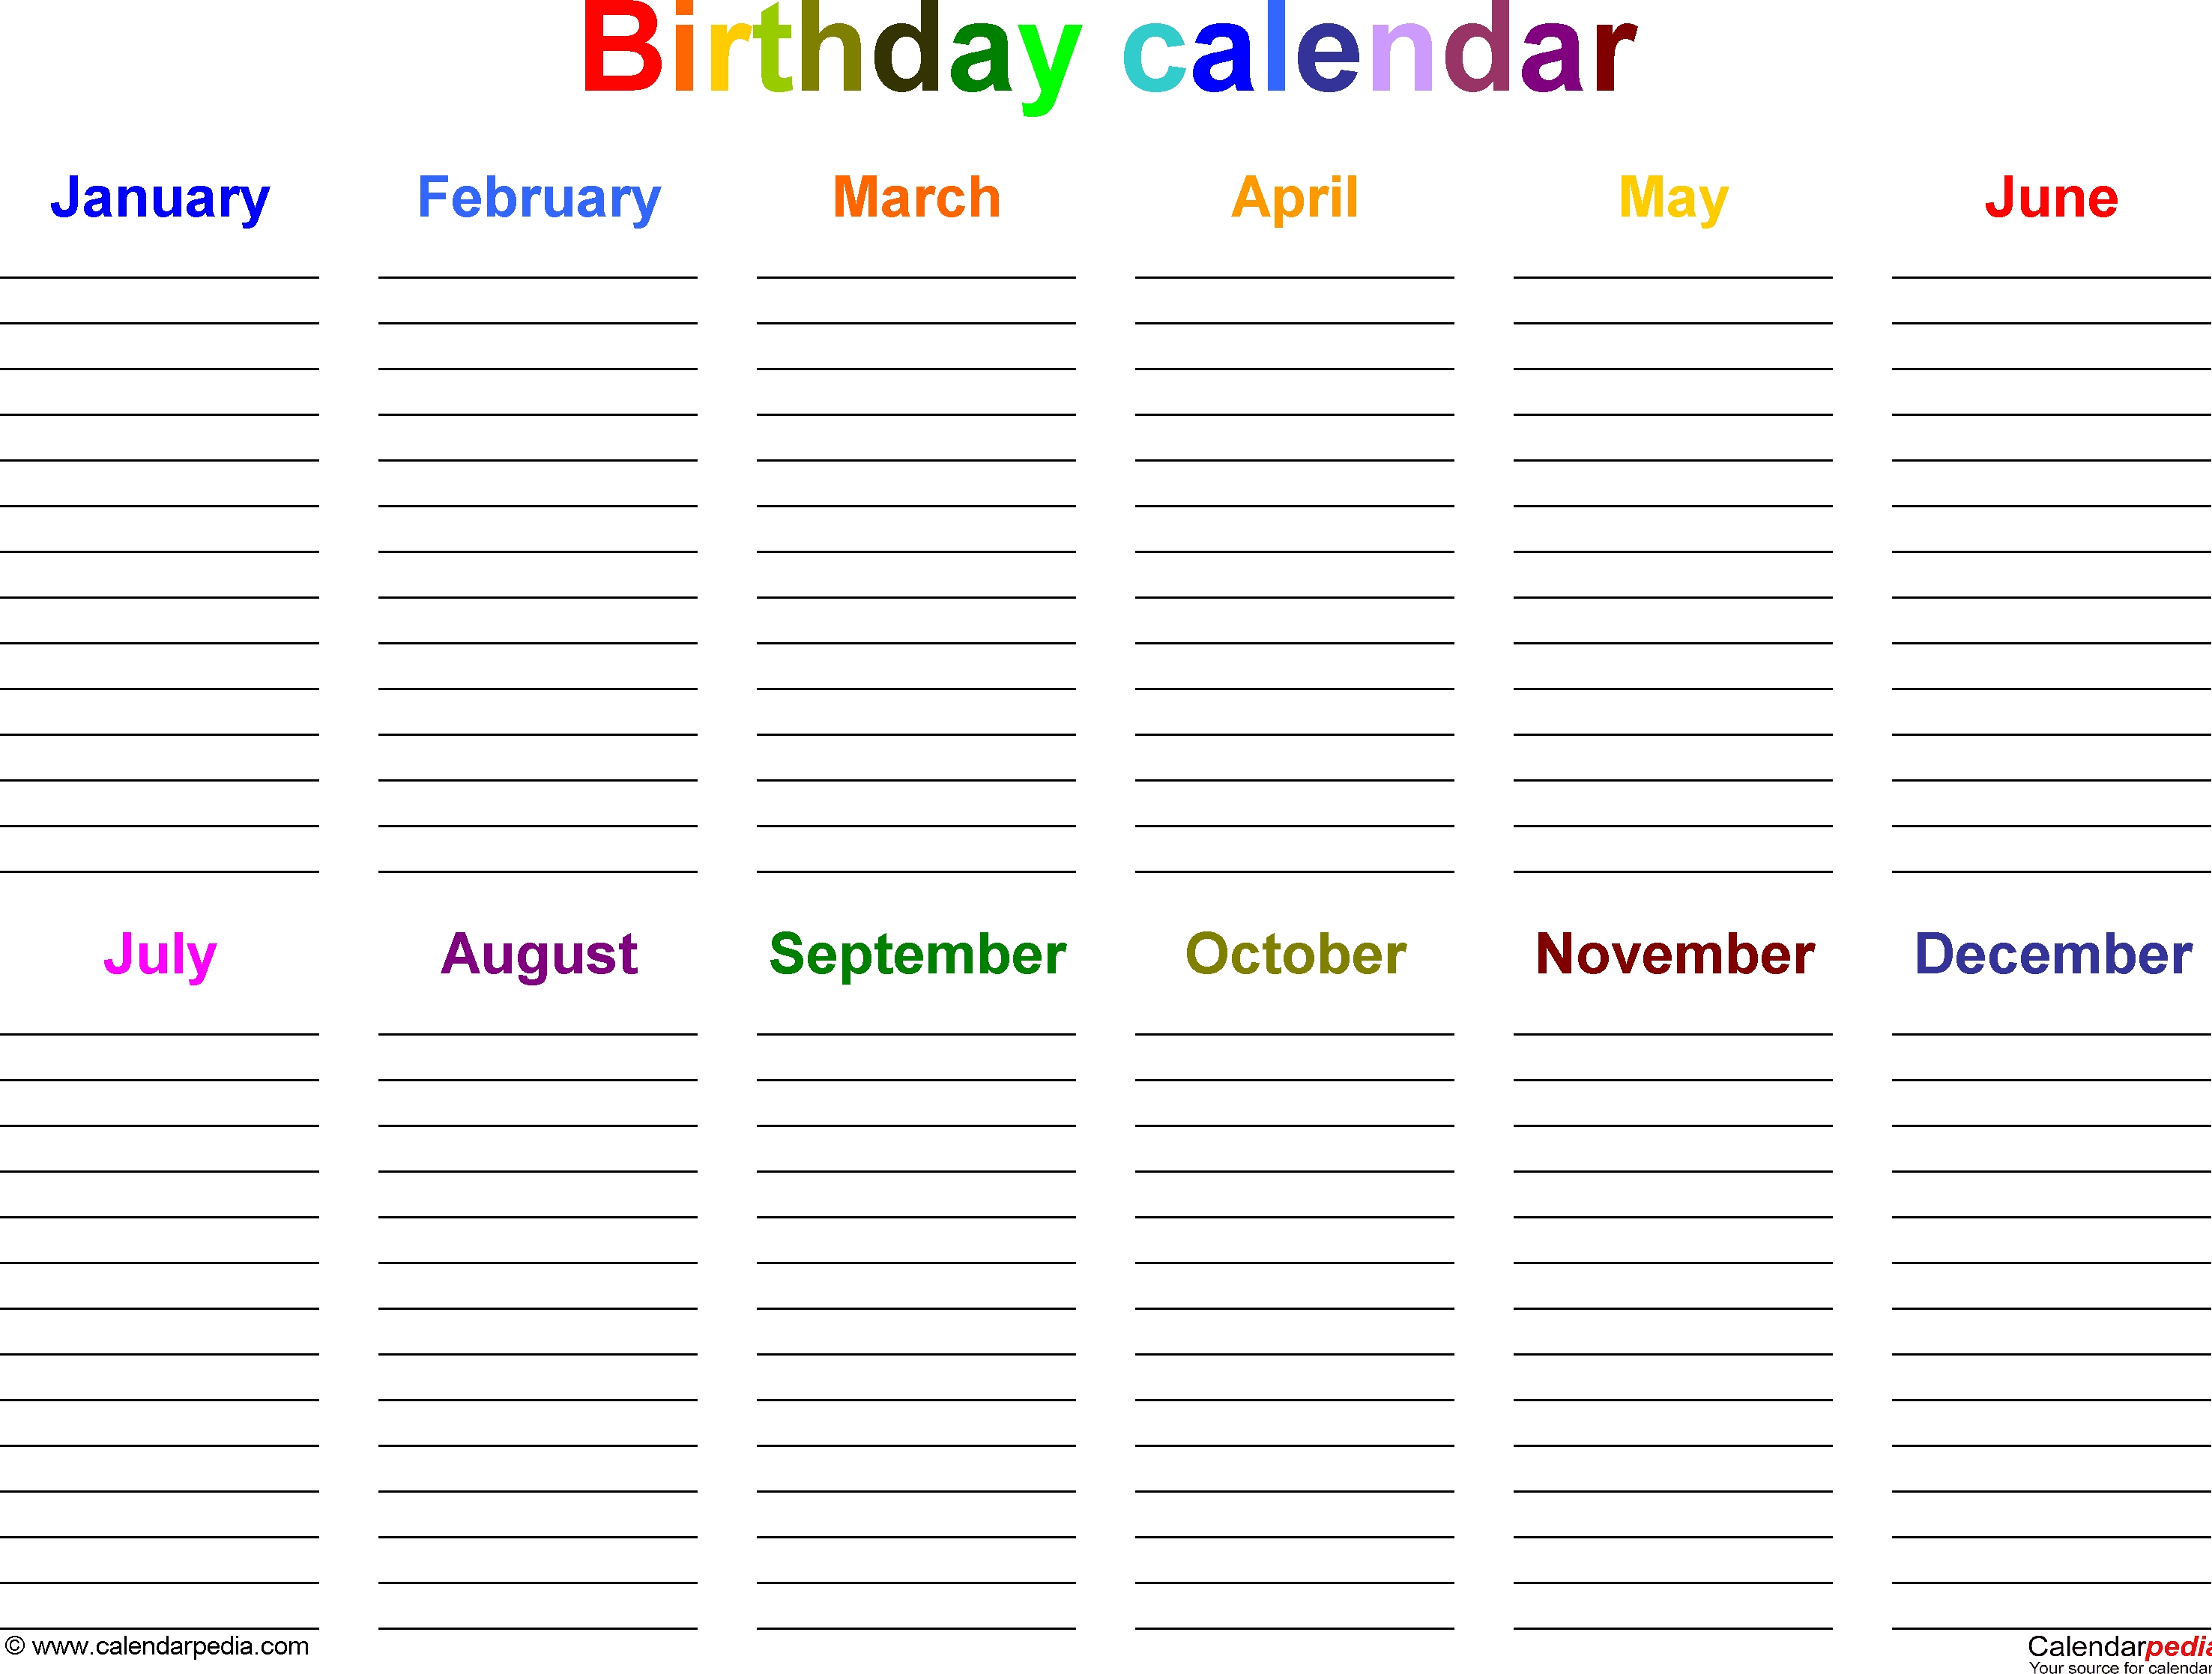 Excel Template For Birthday Calendar In Color (Landscape-Excel Countdown Calendar Template